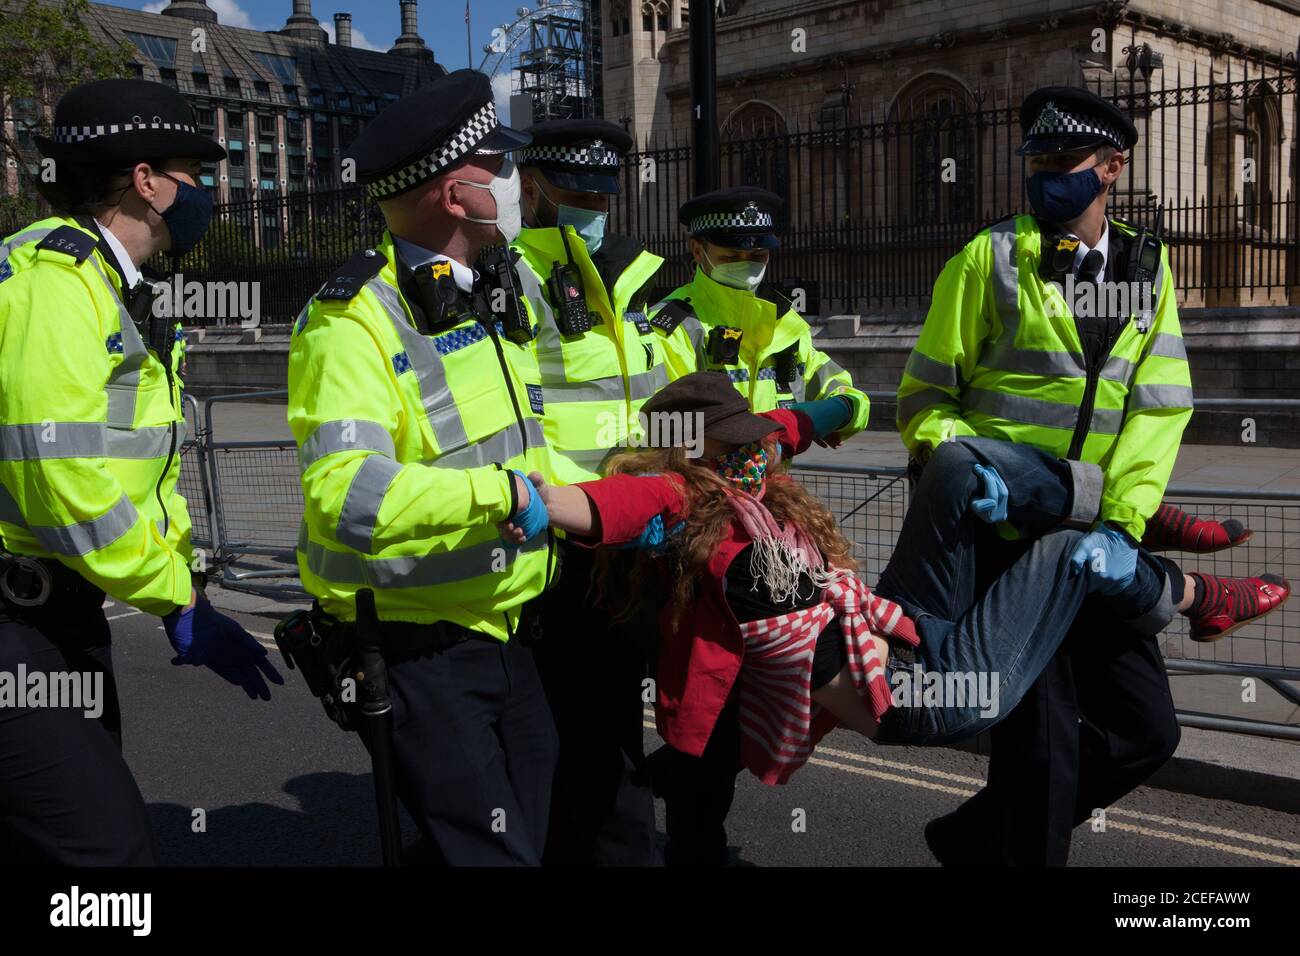 London, UK, 1 Sept. 2020: Extinction Rebellion protesters marched on Parliament Square and breached police lines to close surrounding roads. A few arrests were made. The environmental campaigners are calling for MPs to support the Climate and Ecological Emergencies Bill (CEE Bill). Anna Watson/Alamy Live News Stock Photo